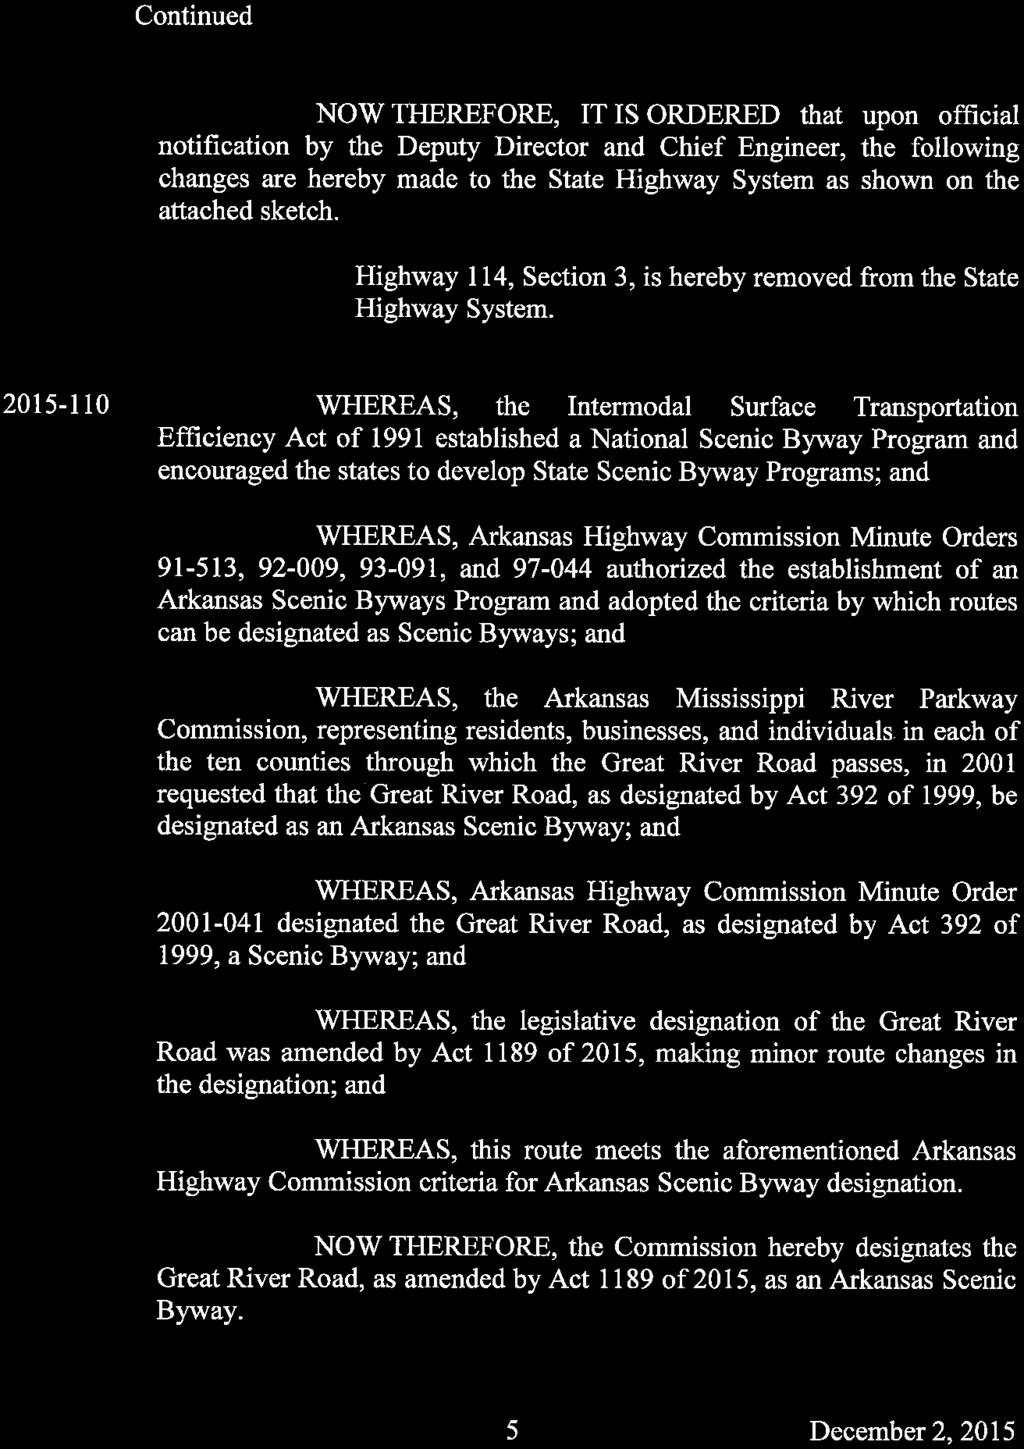 2015-109-Continued NOW THEREFORE, IT IS ORDERED that upon official notification by the Deputy Director and Chief Engineer, the following changes are hereby made to the State Highway System as shown